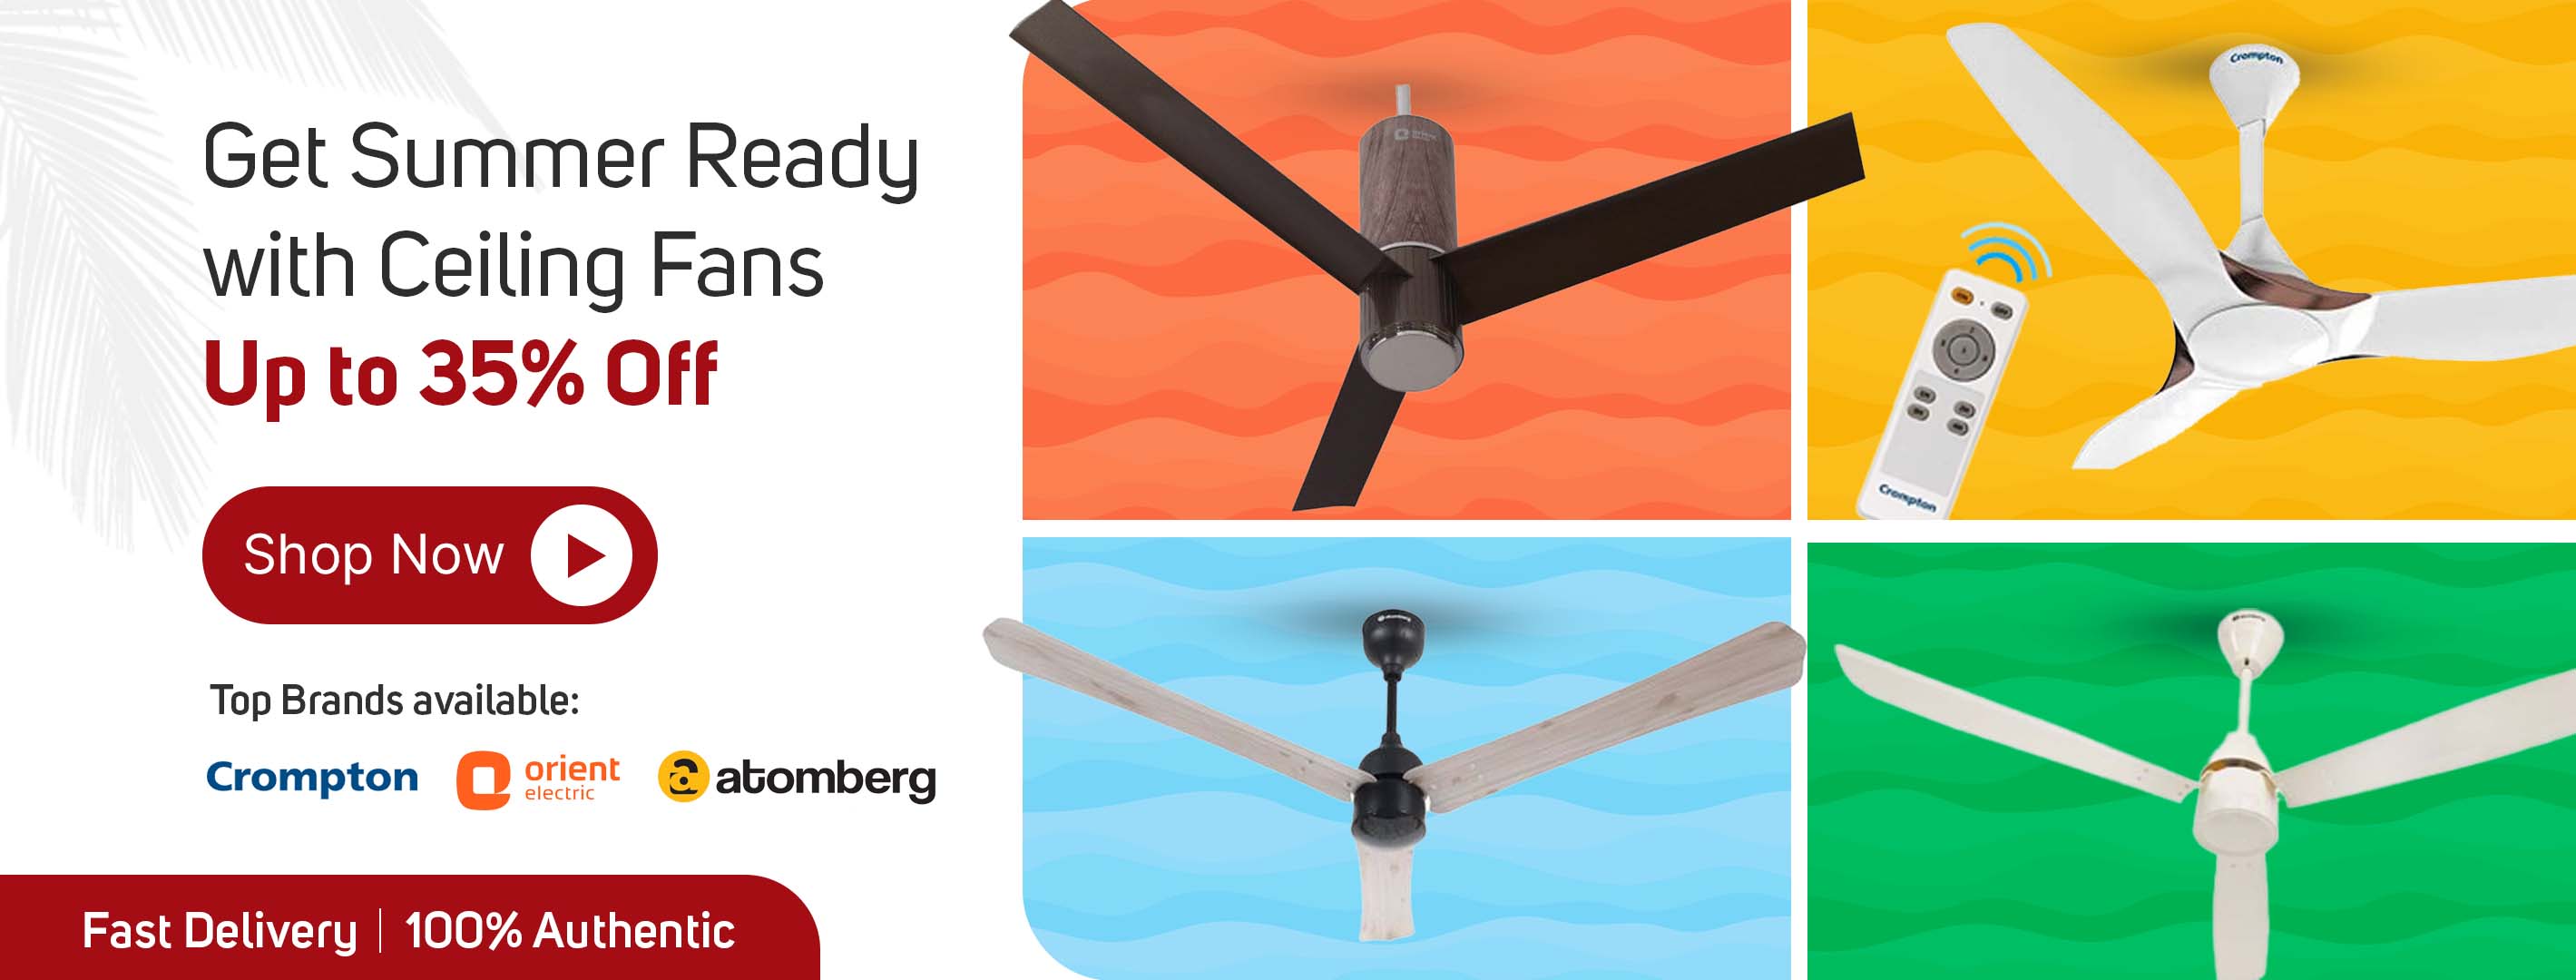 Ceiling Fans Upto 35% Off